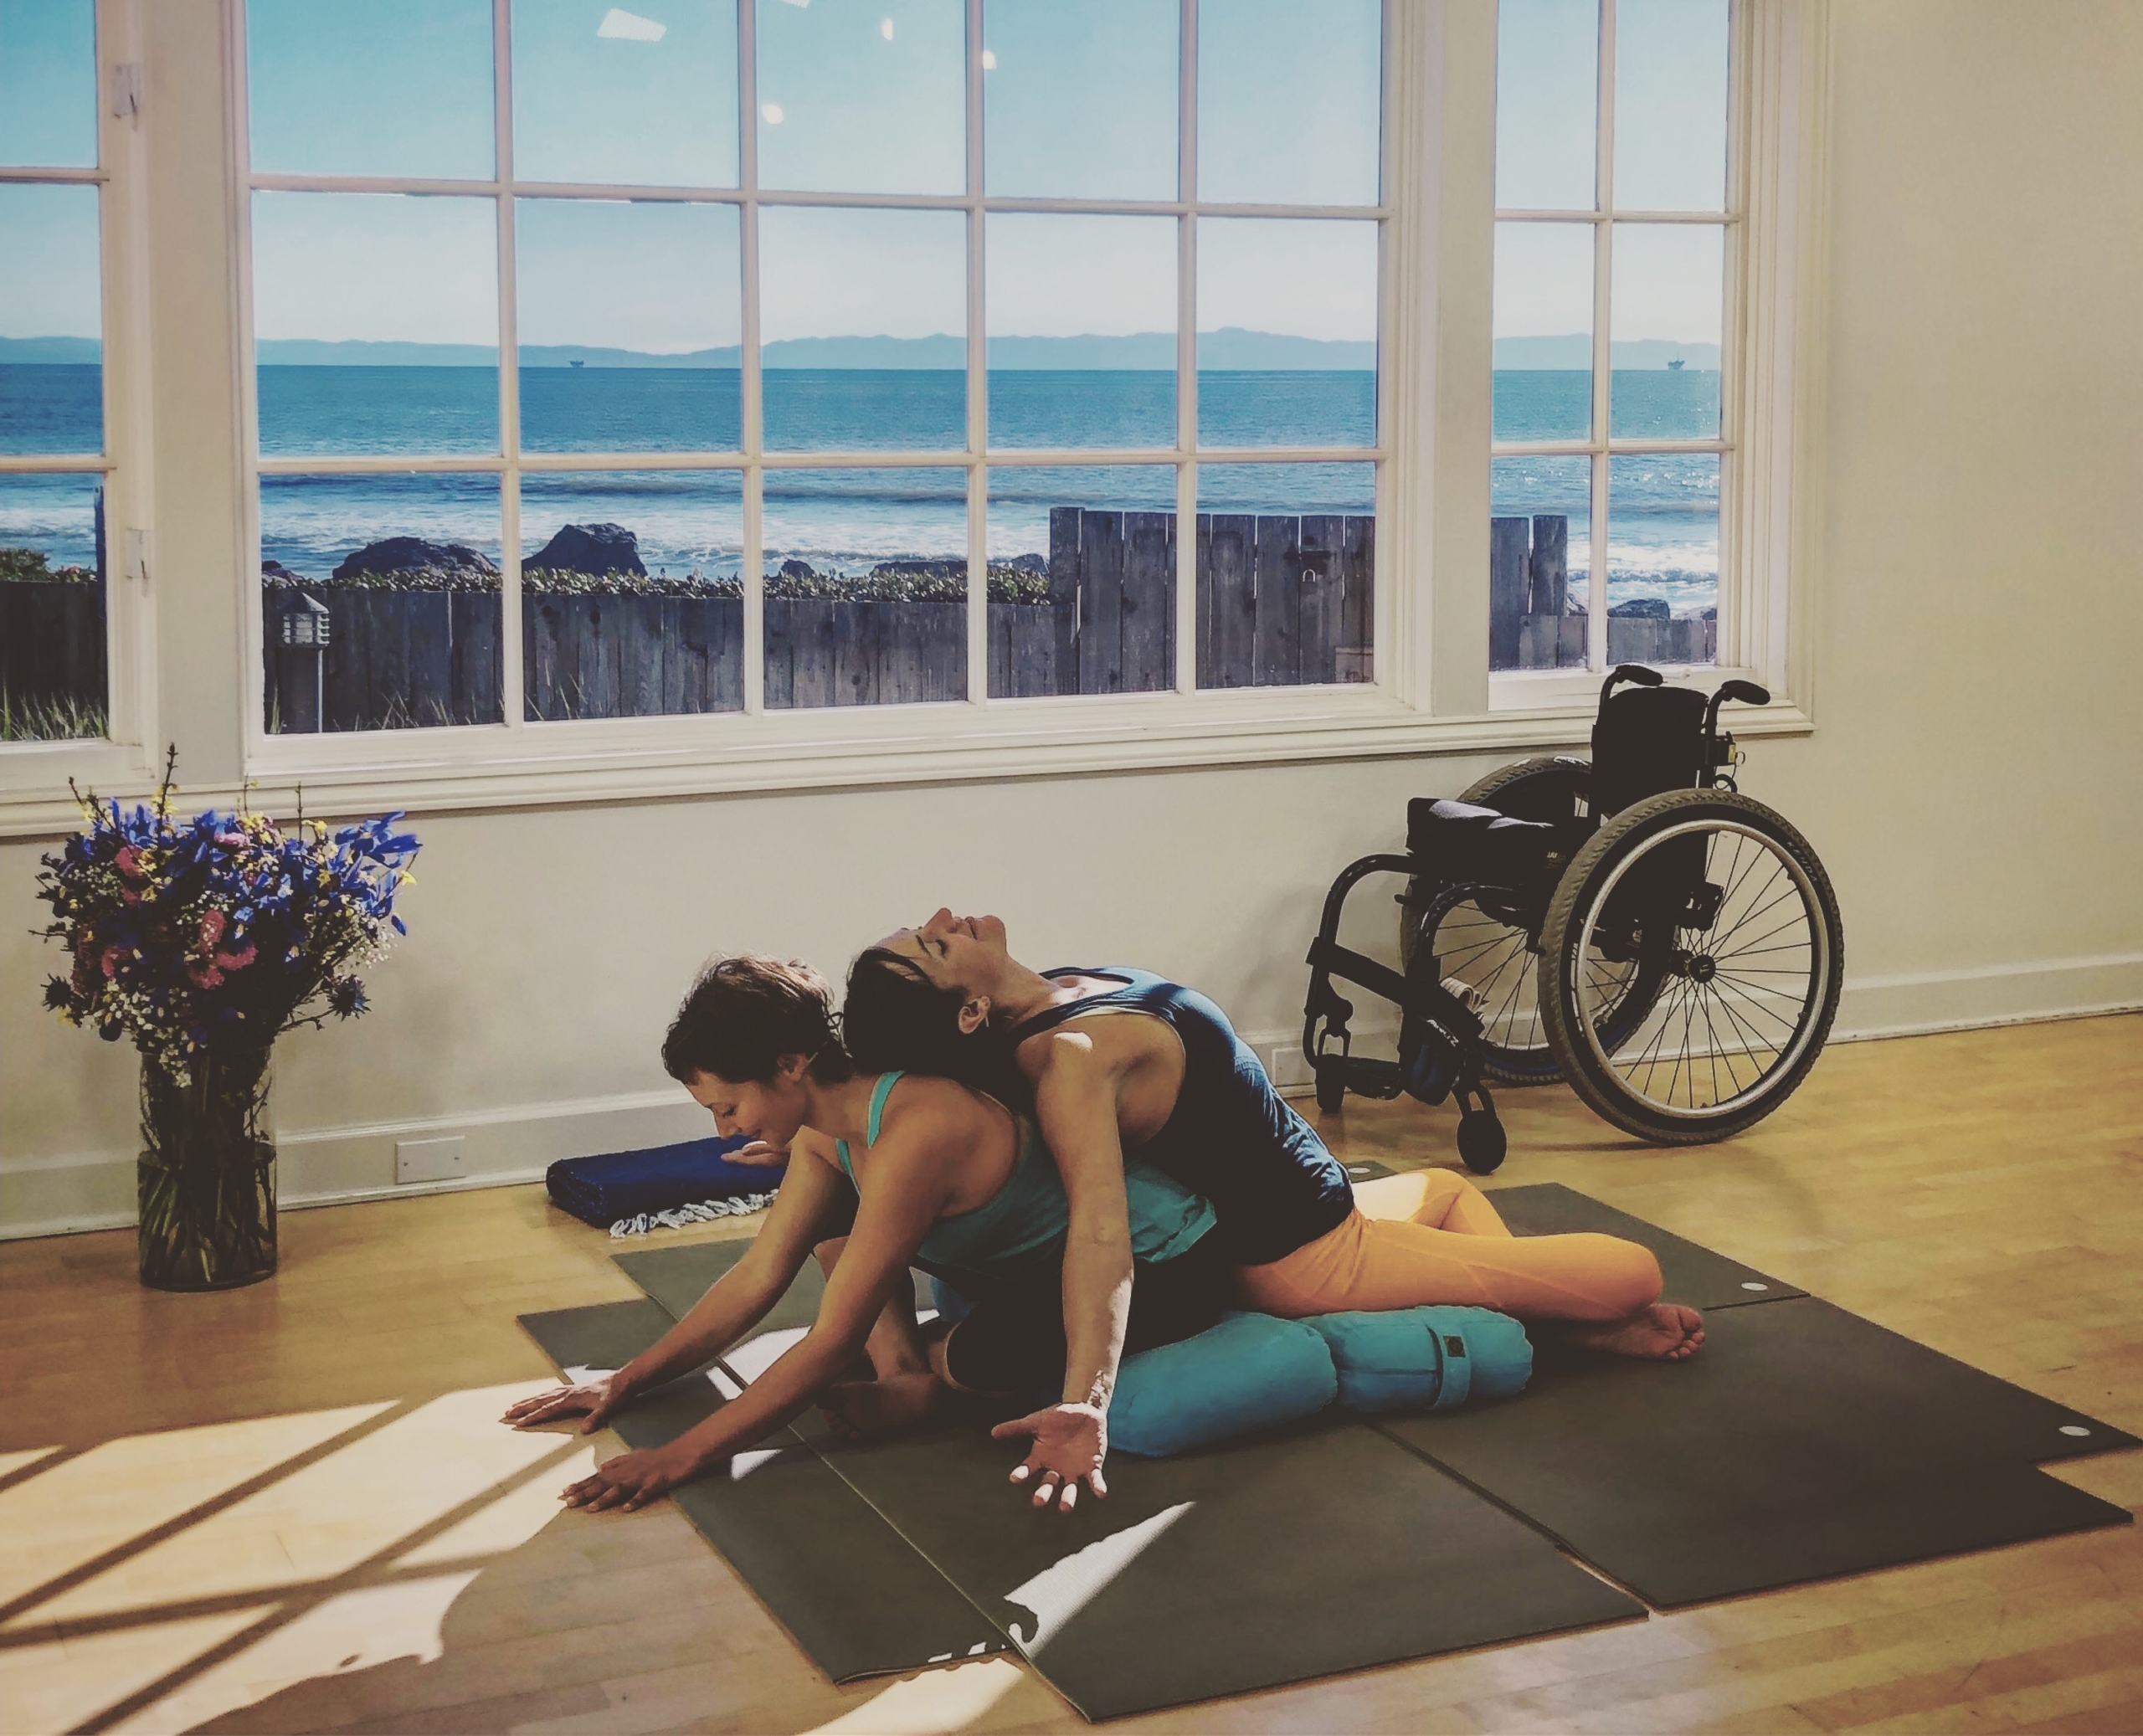 Two women in a yoga workout pose, one stretched over the others back, sitting in front of window, empty manual wheelchair in background